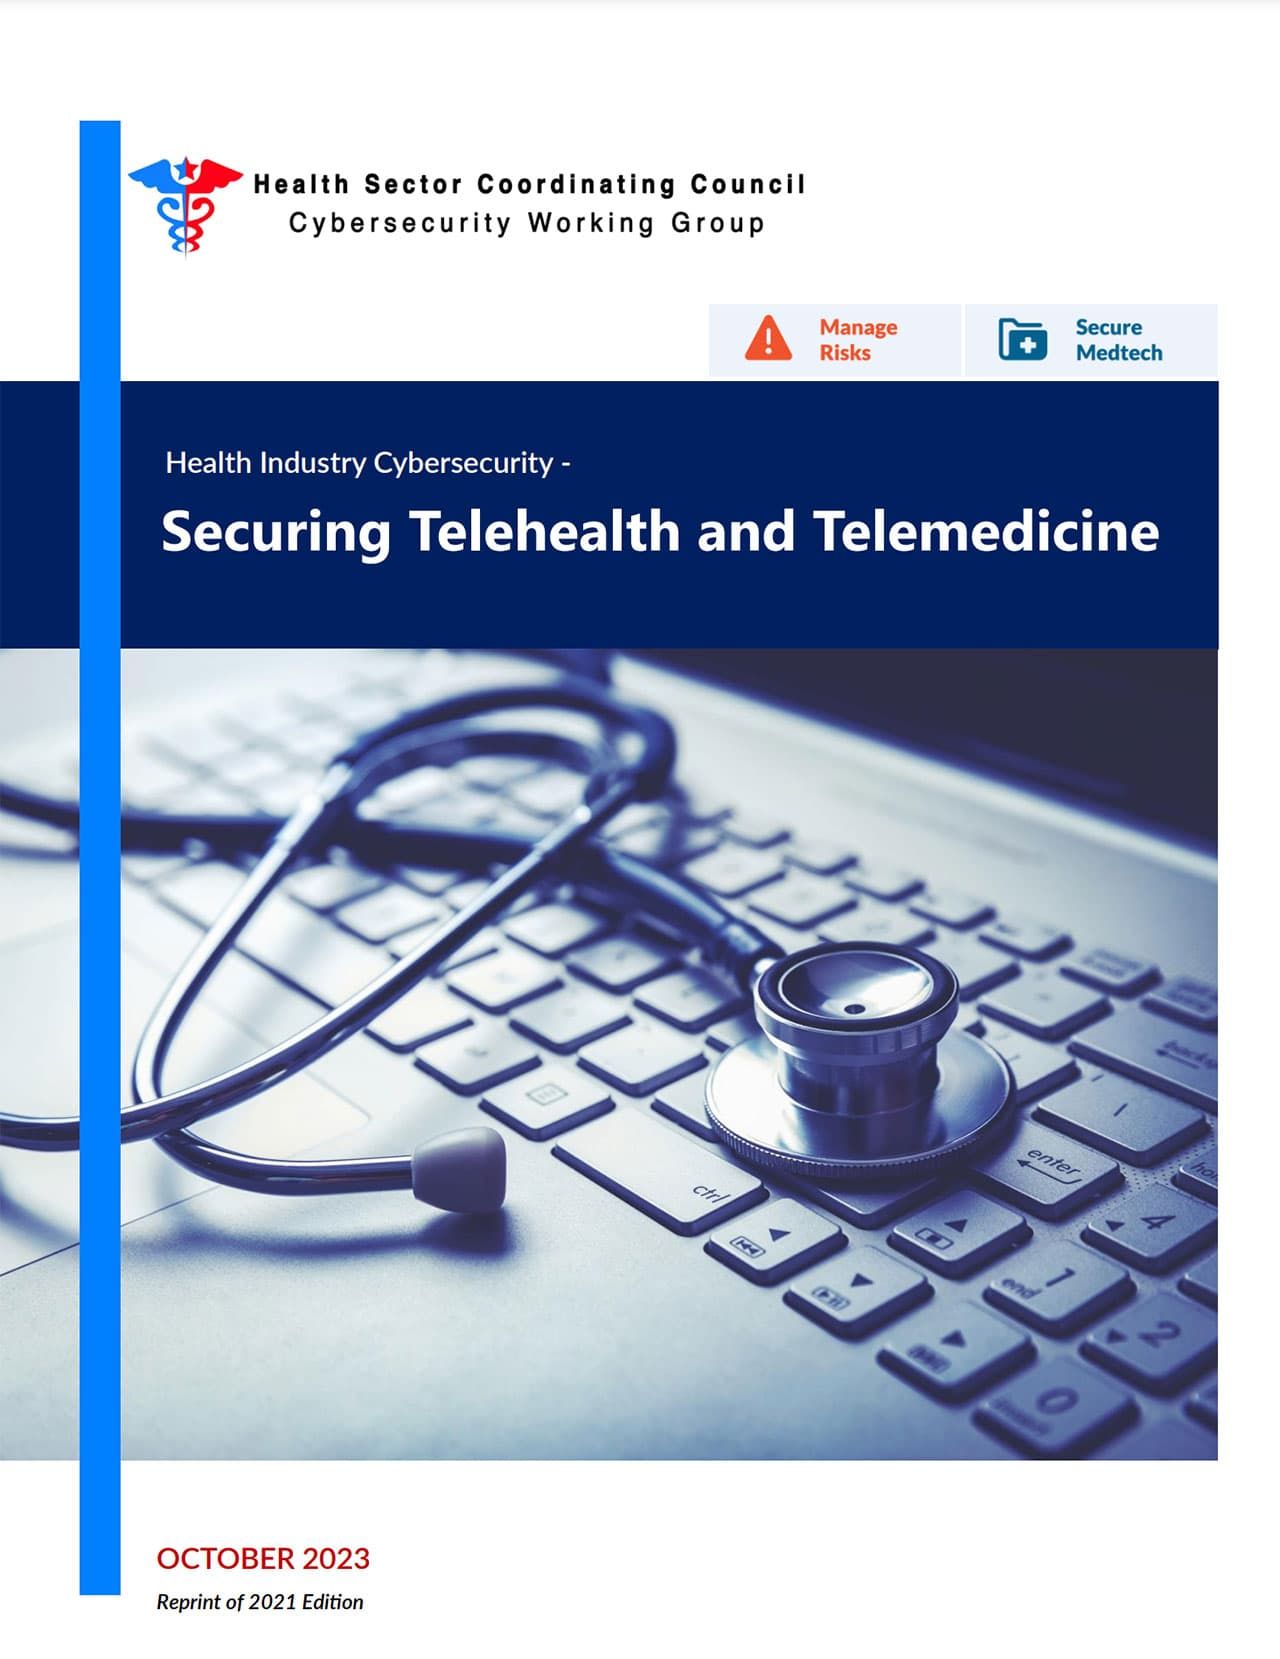 Health Industry Cybersecurity – Securing Telehealth and Telemedicine (HIC-STAT)